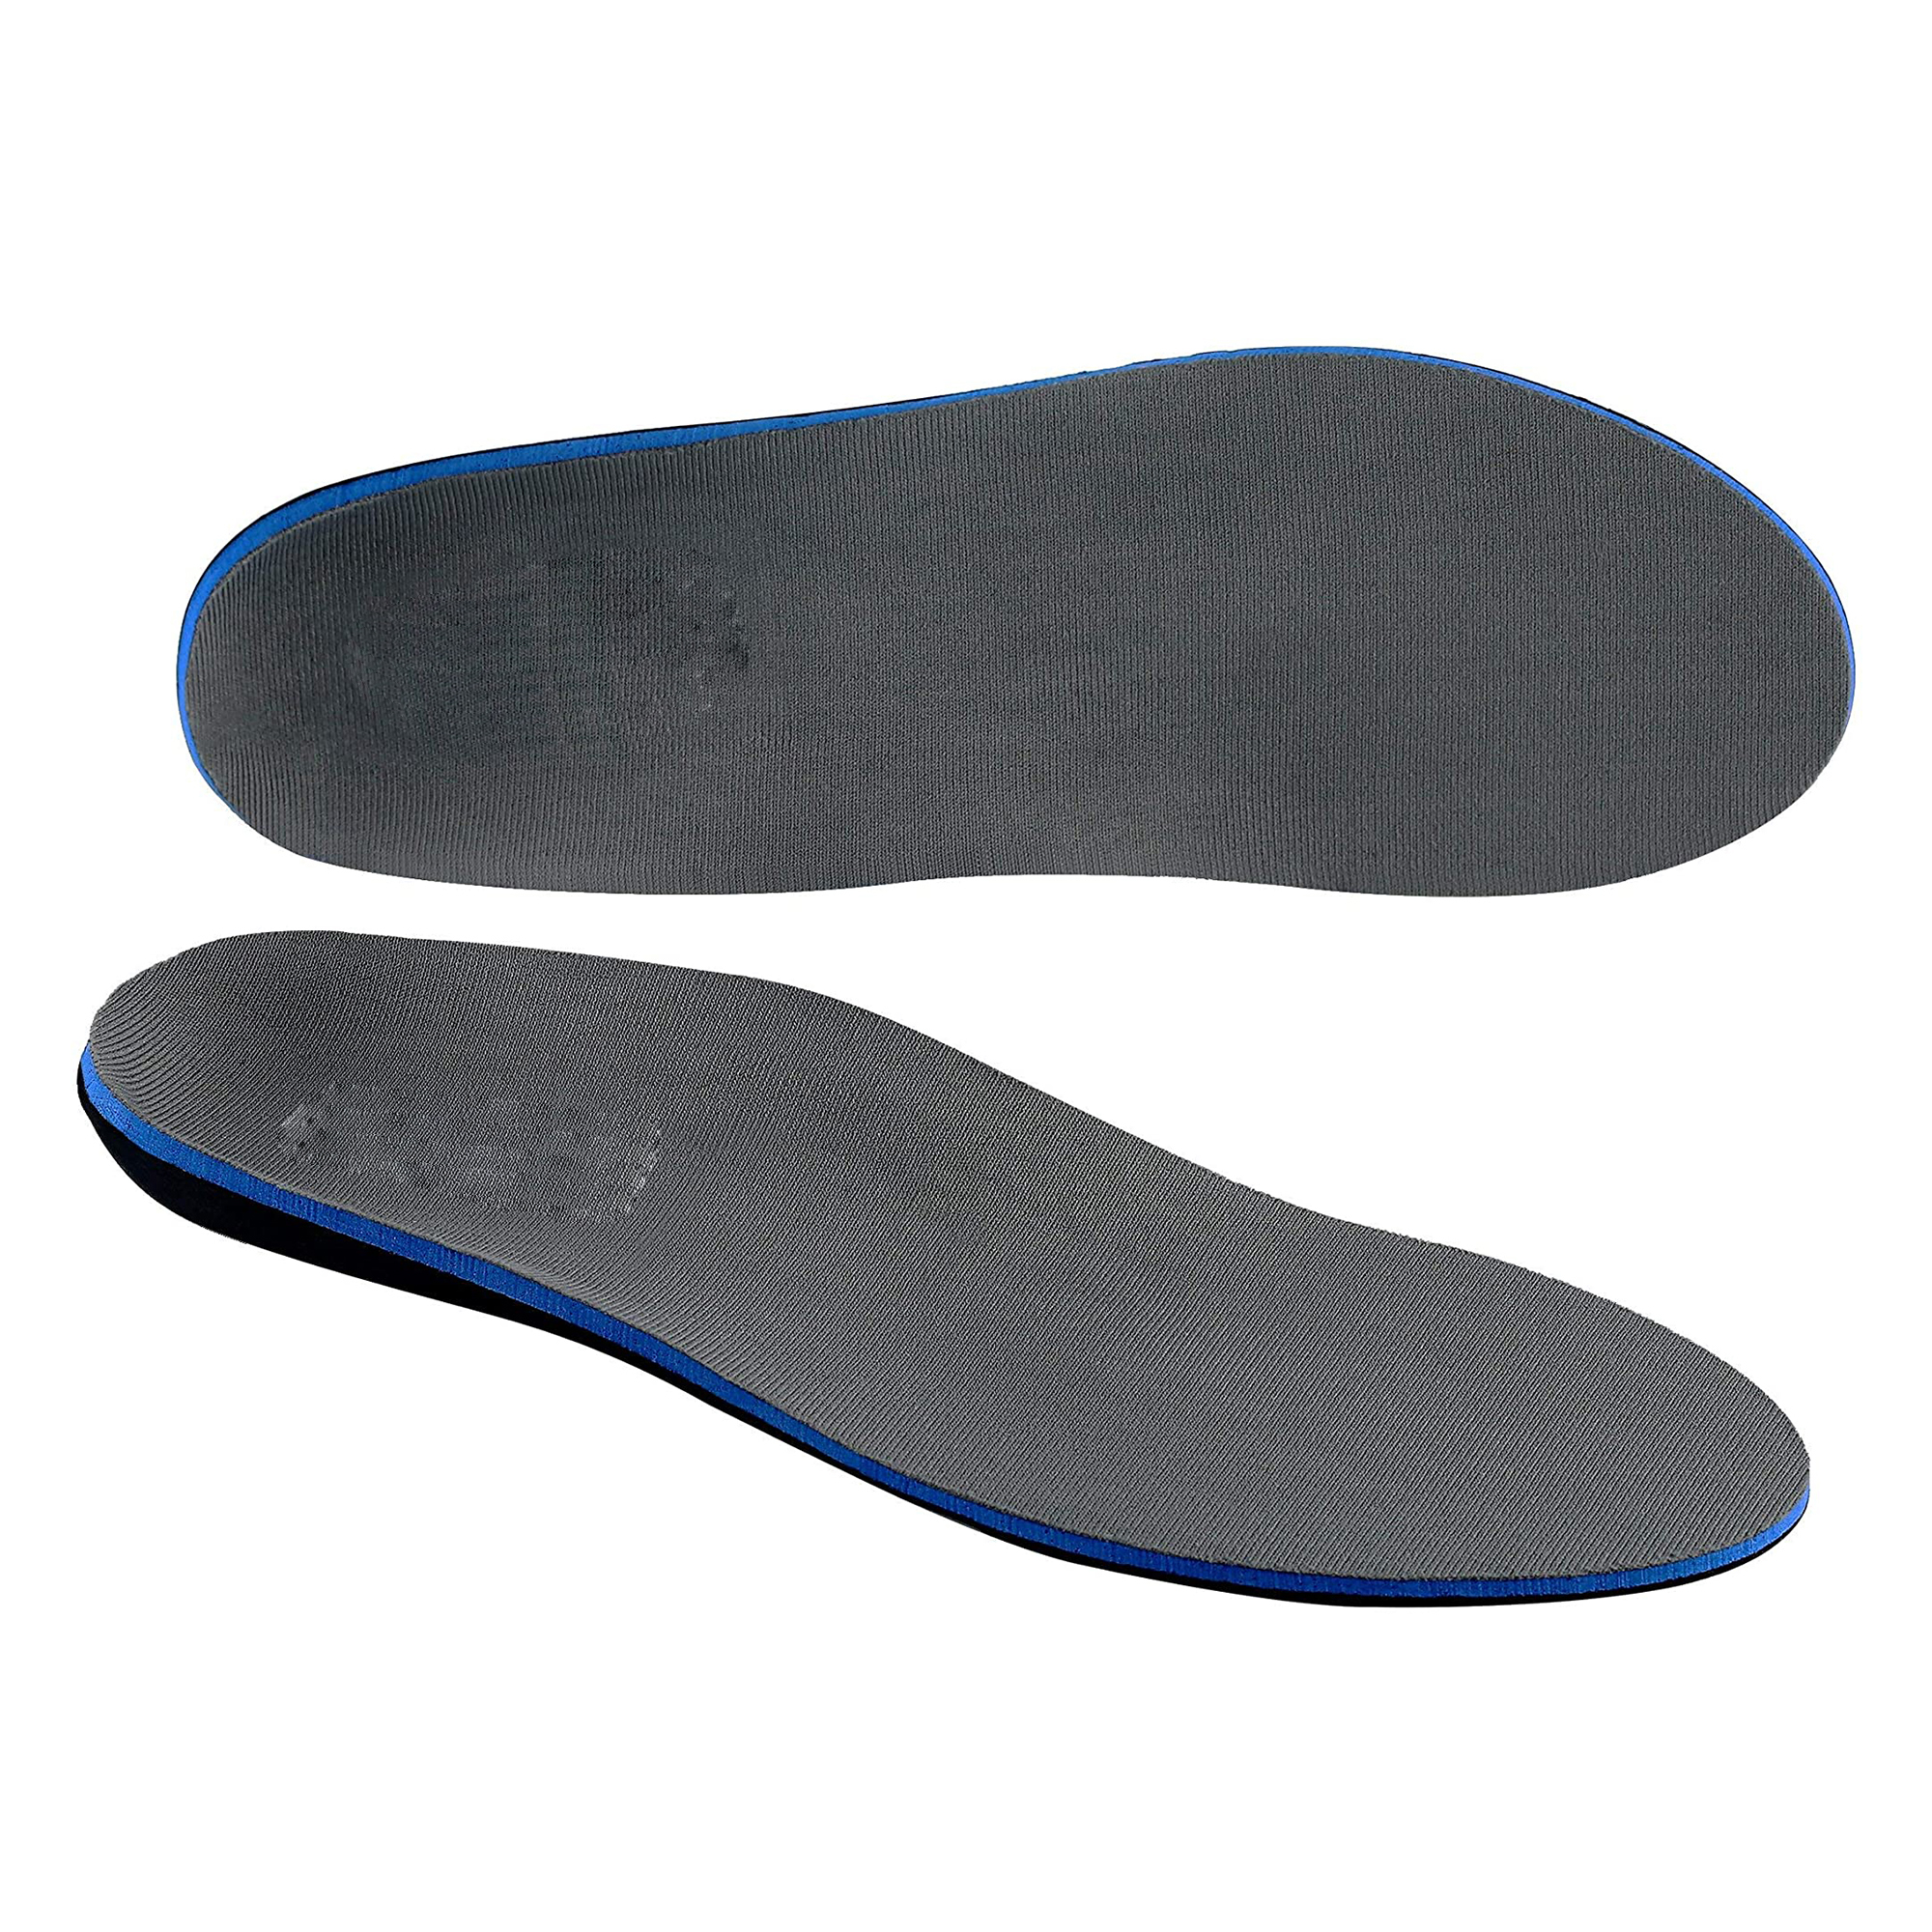  Insole for shoes